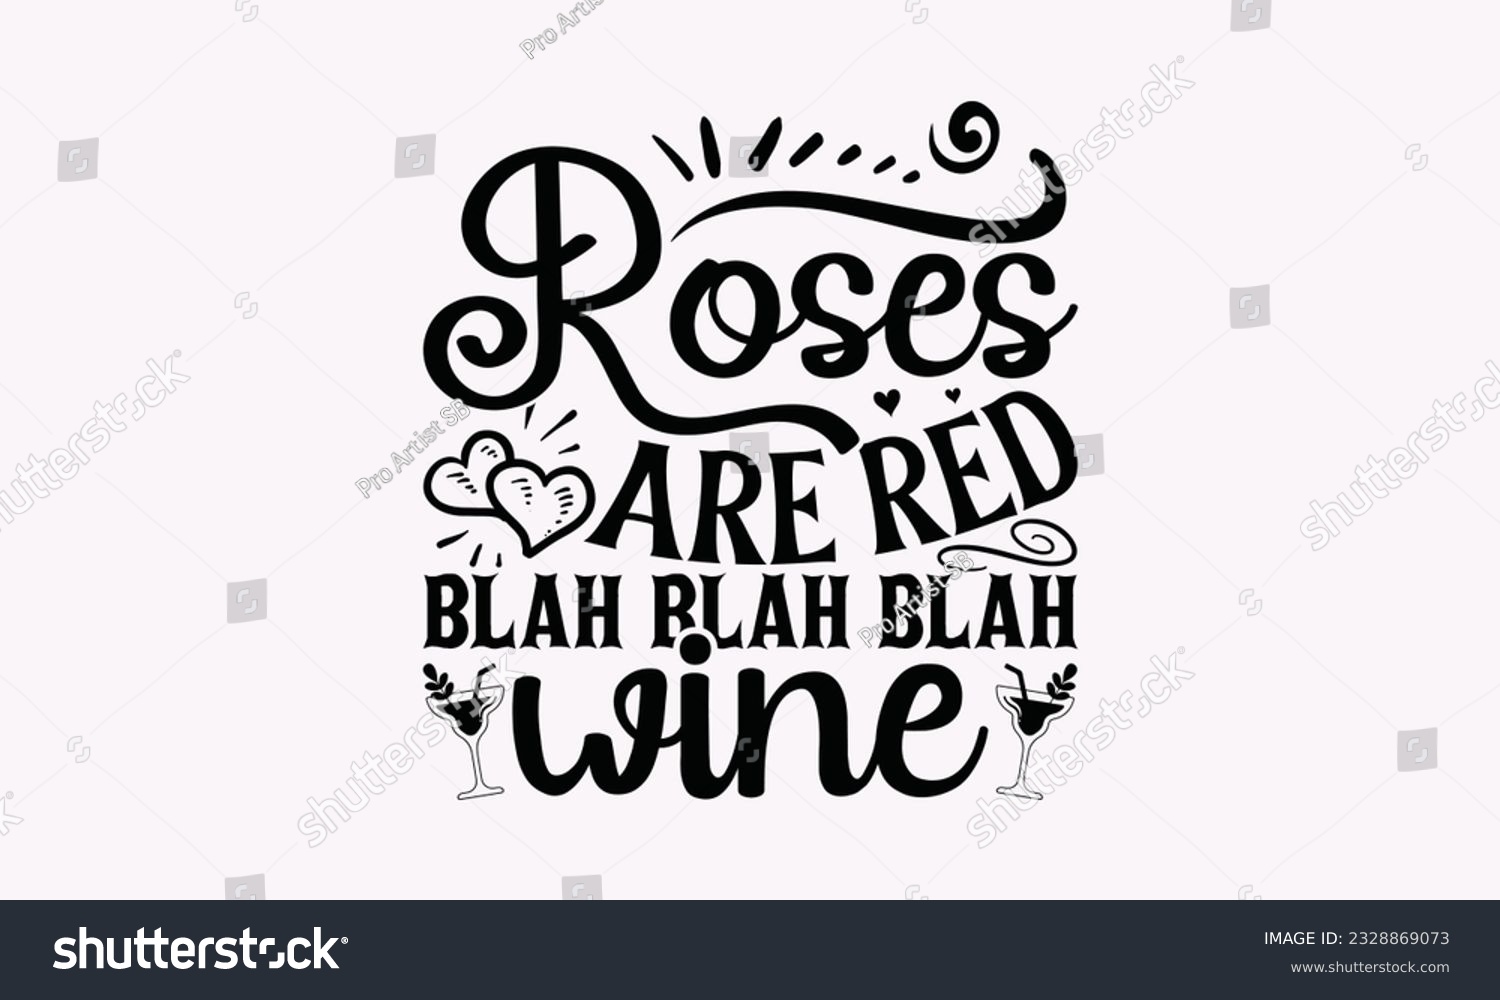 SVG of Roses Are Red Blah Blah Blah Wine - Alcohol SVG Design, Cheer Quotes, Hand drawn lettering phrase, Isolated on white background. svg